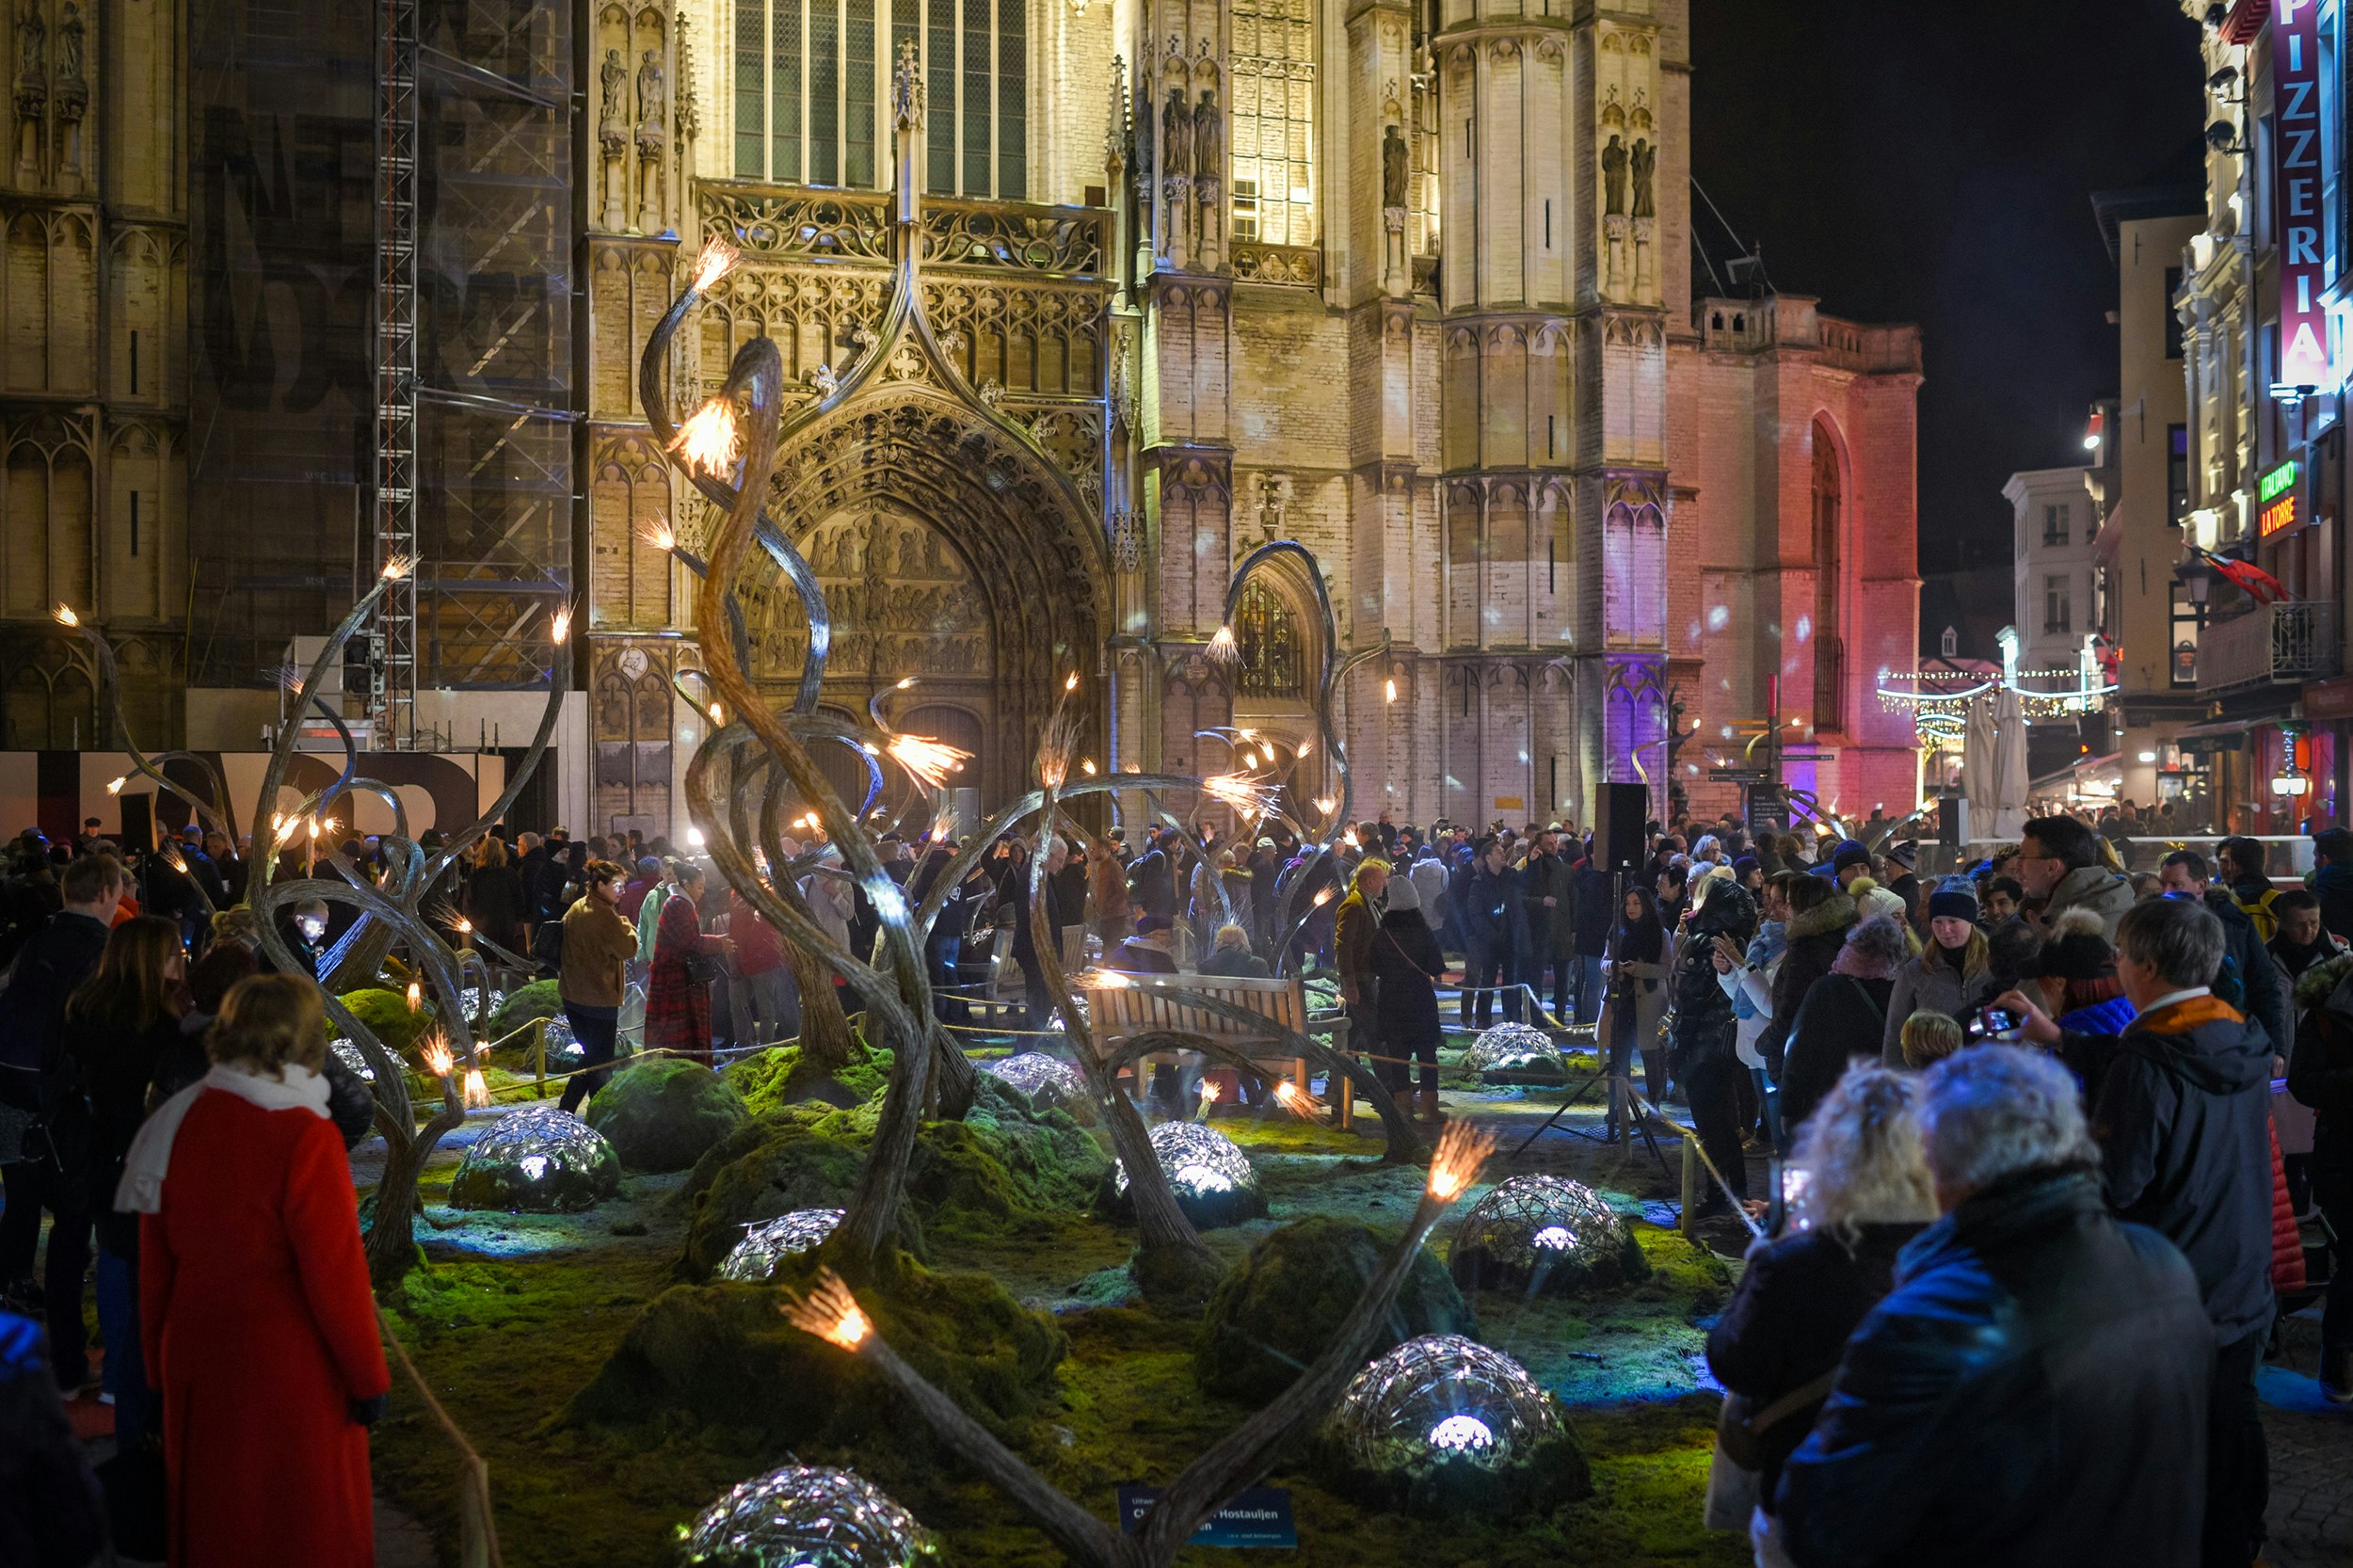 Illuminated willow tree sculptures in front of the cathedral at night